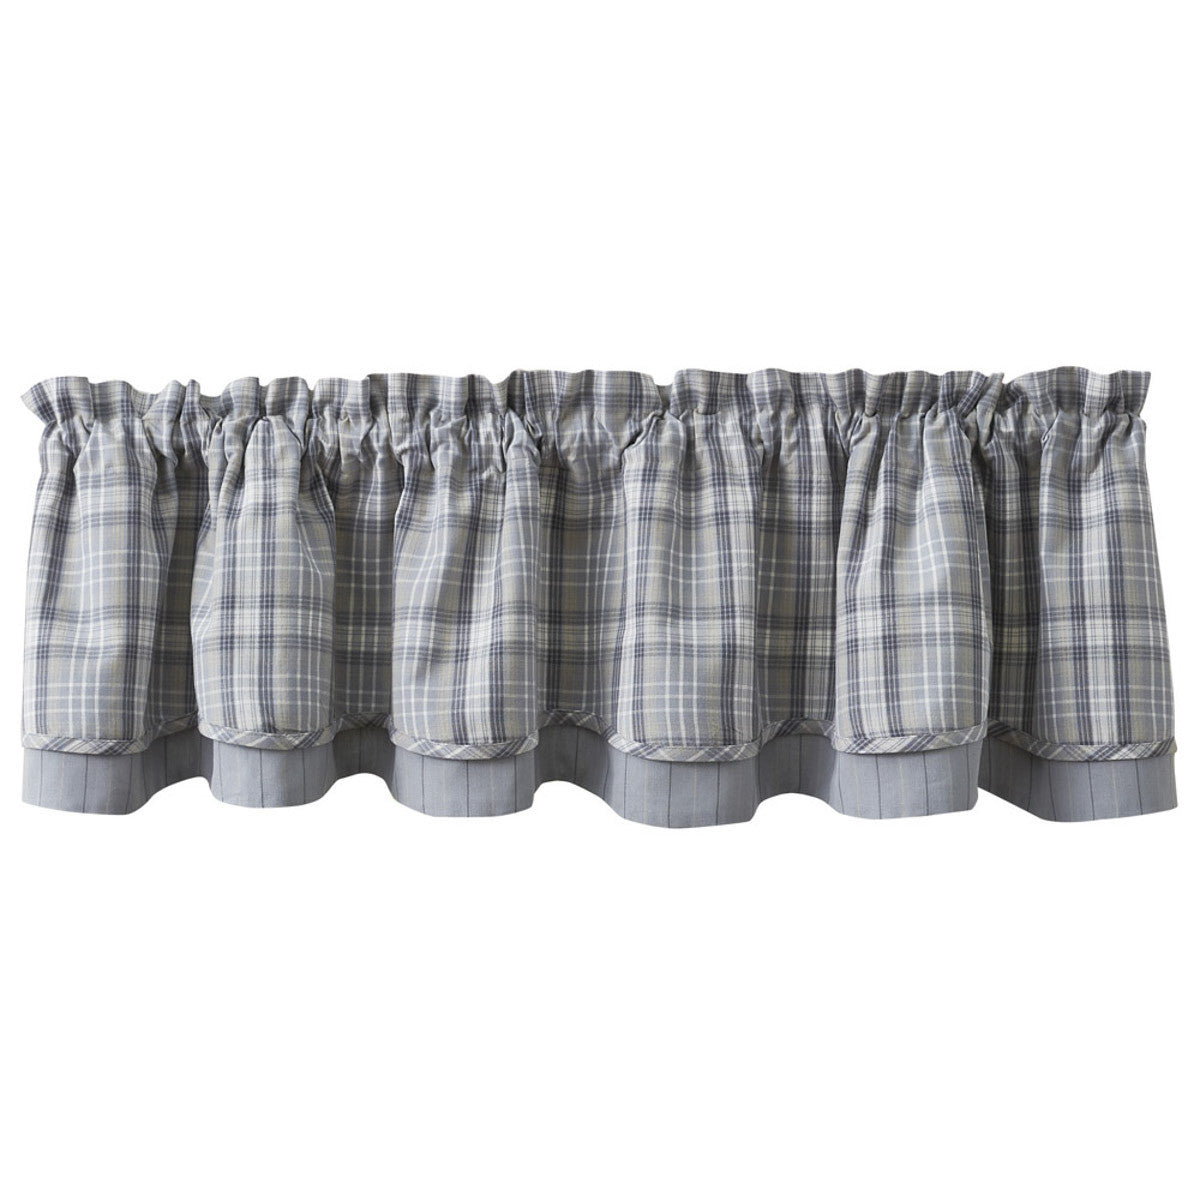 Hartwick Valance - Lined Layered Park Designs